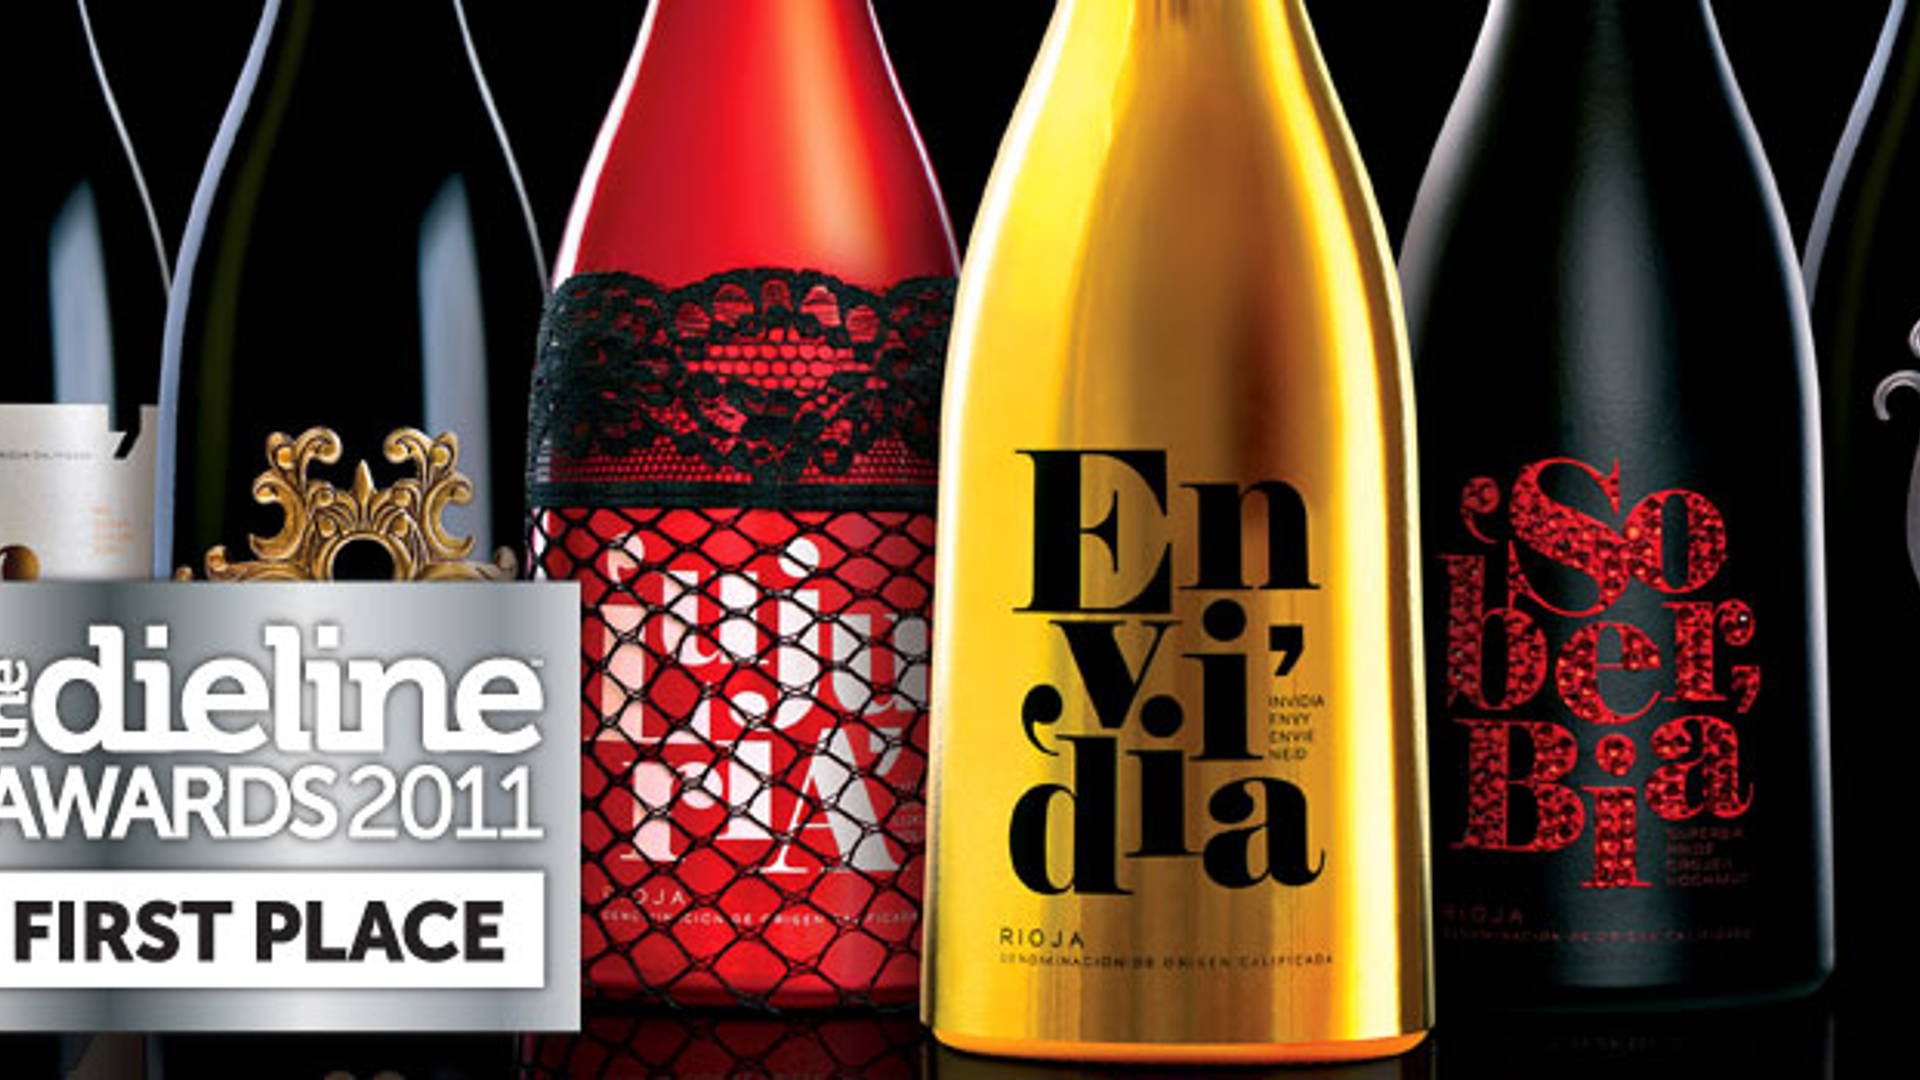 Featured image for The Dieline Awards 2011: First Place - Siete Pecados: Seven Deadly Sins